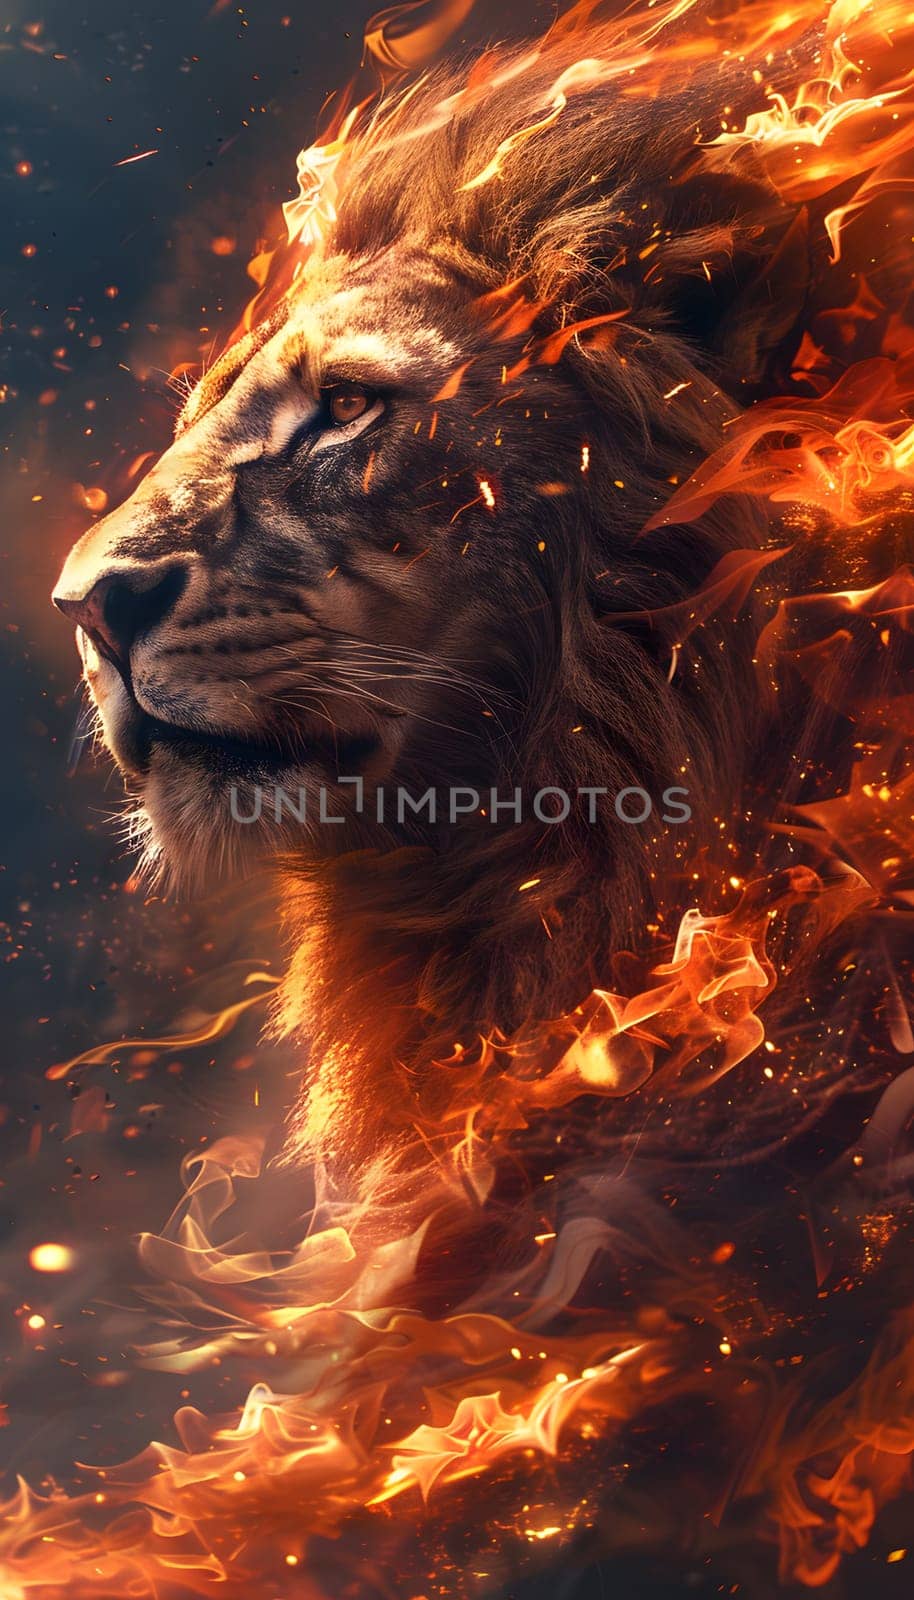 A lion is engulfed by flames in a dark background, creating a captivating artwork filled with heat, smoke, and a sense of impending danger